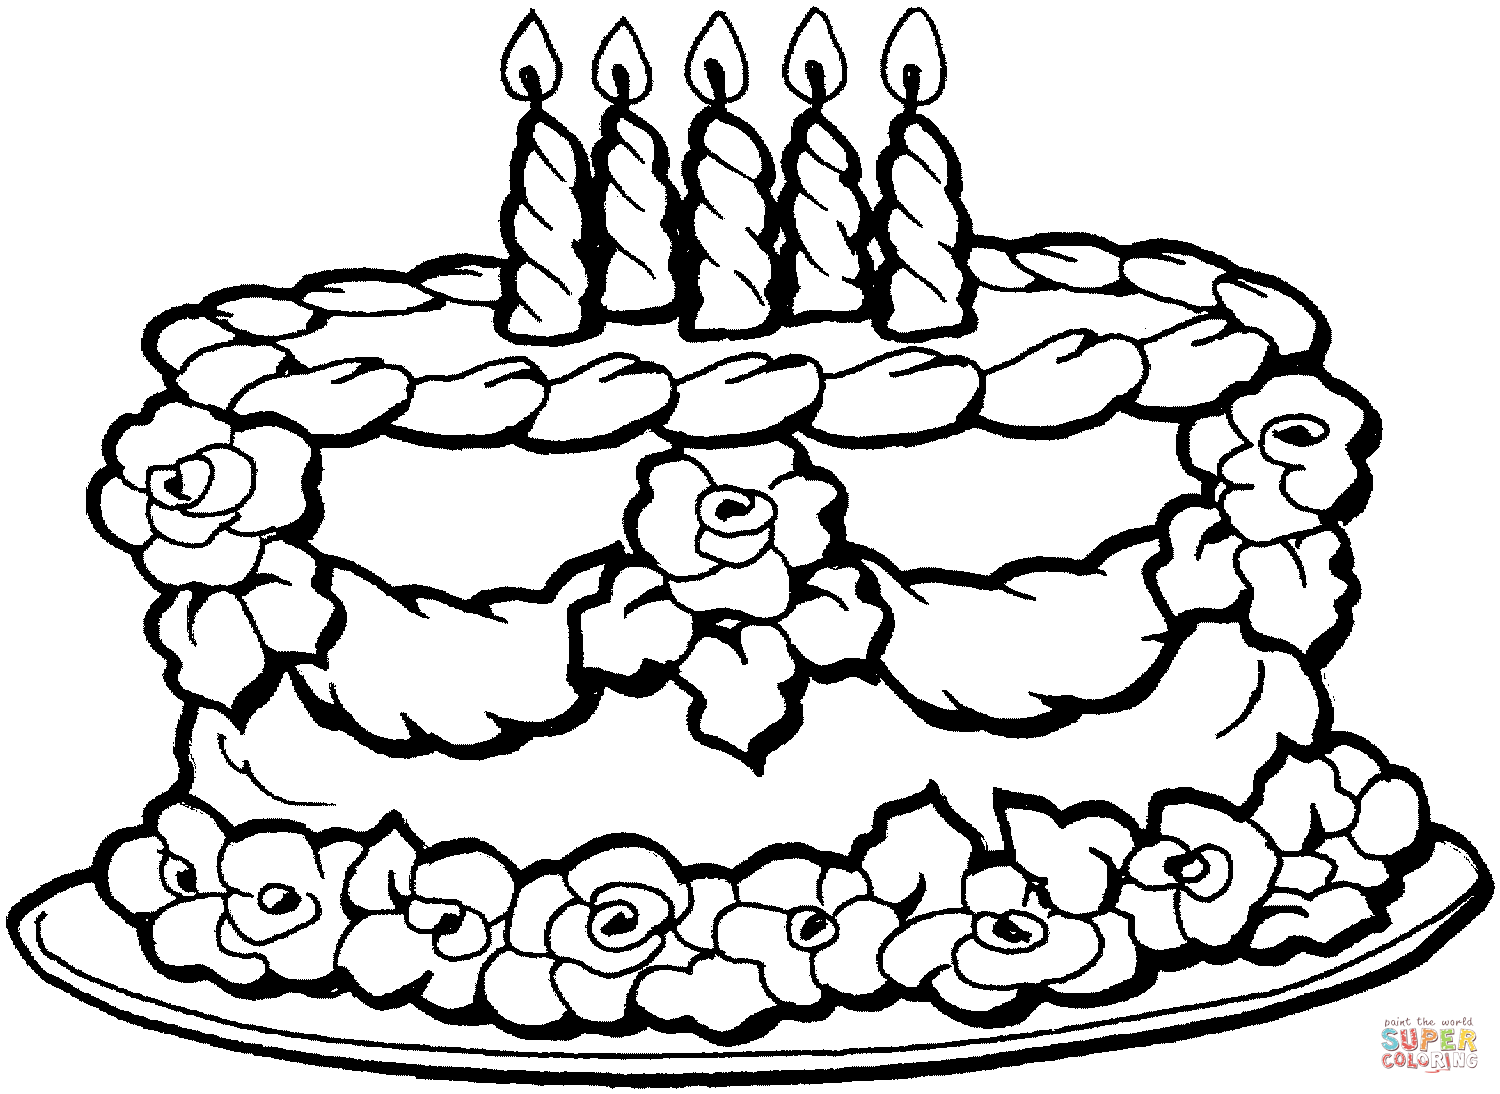 Cake Coloring Pages To Print